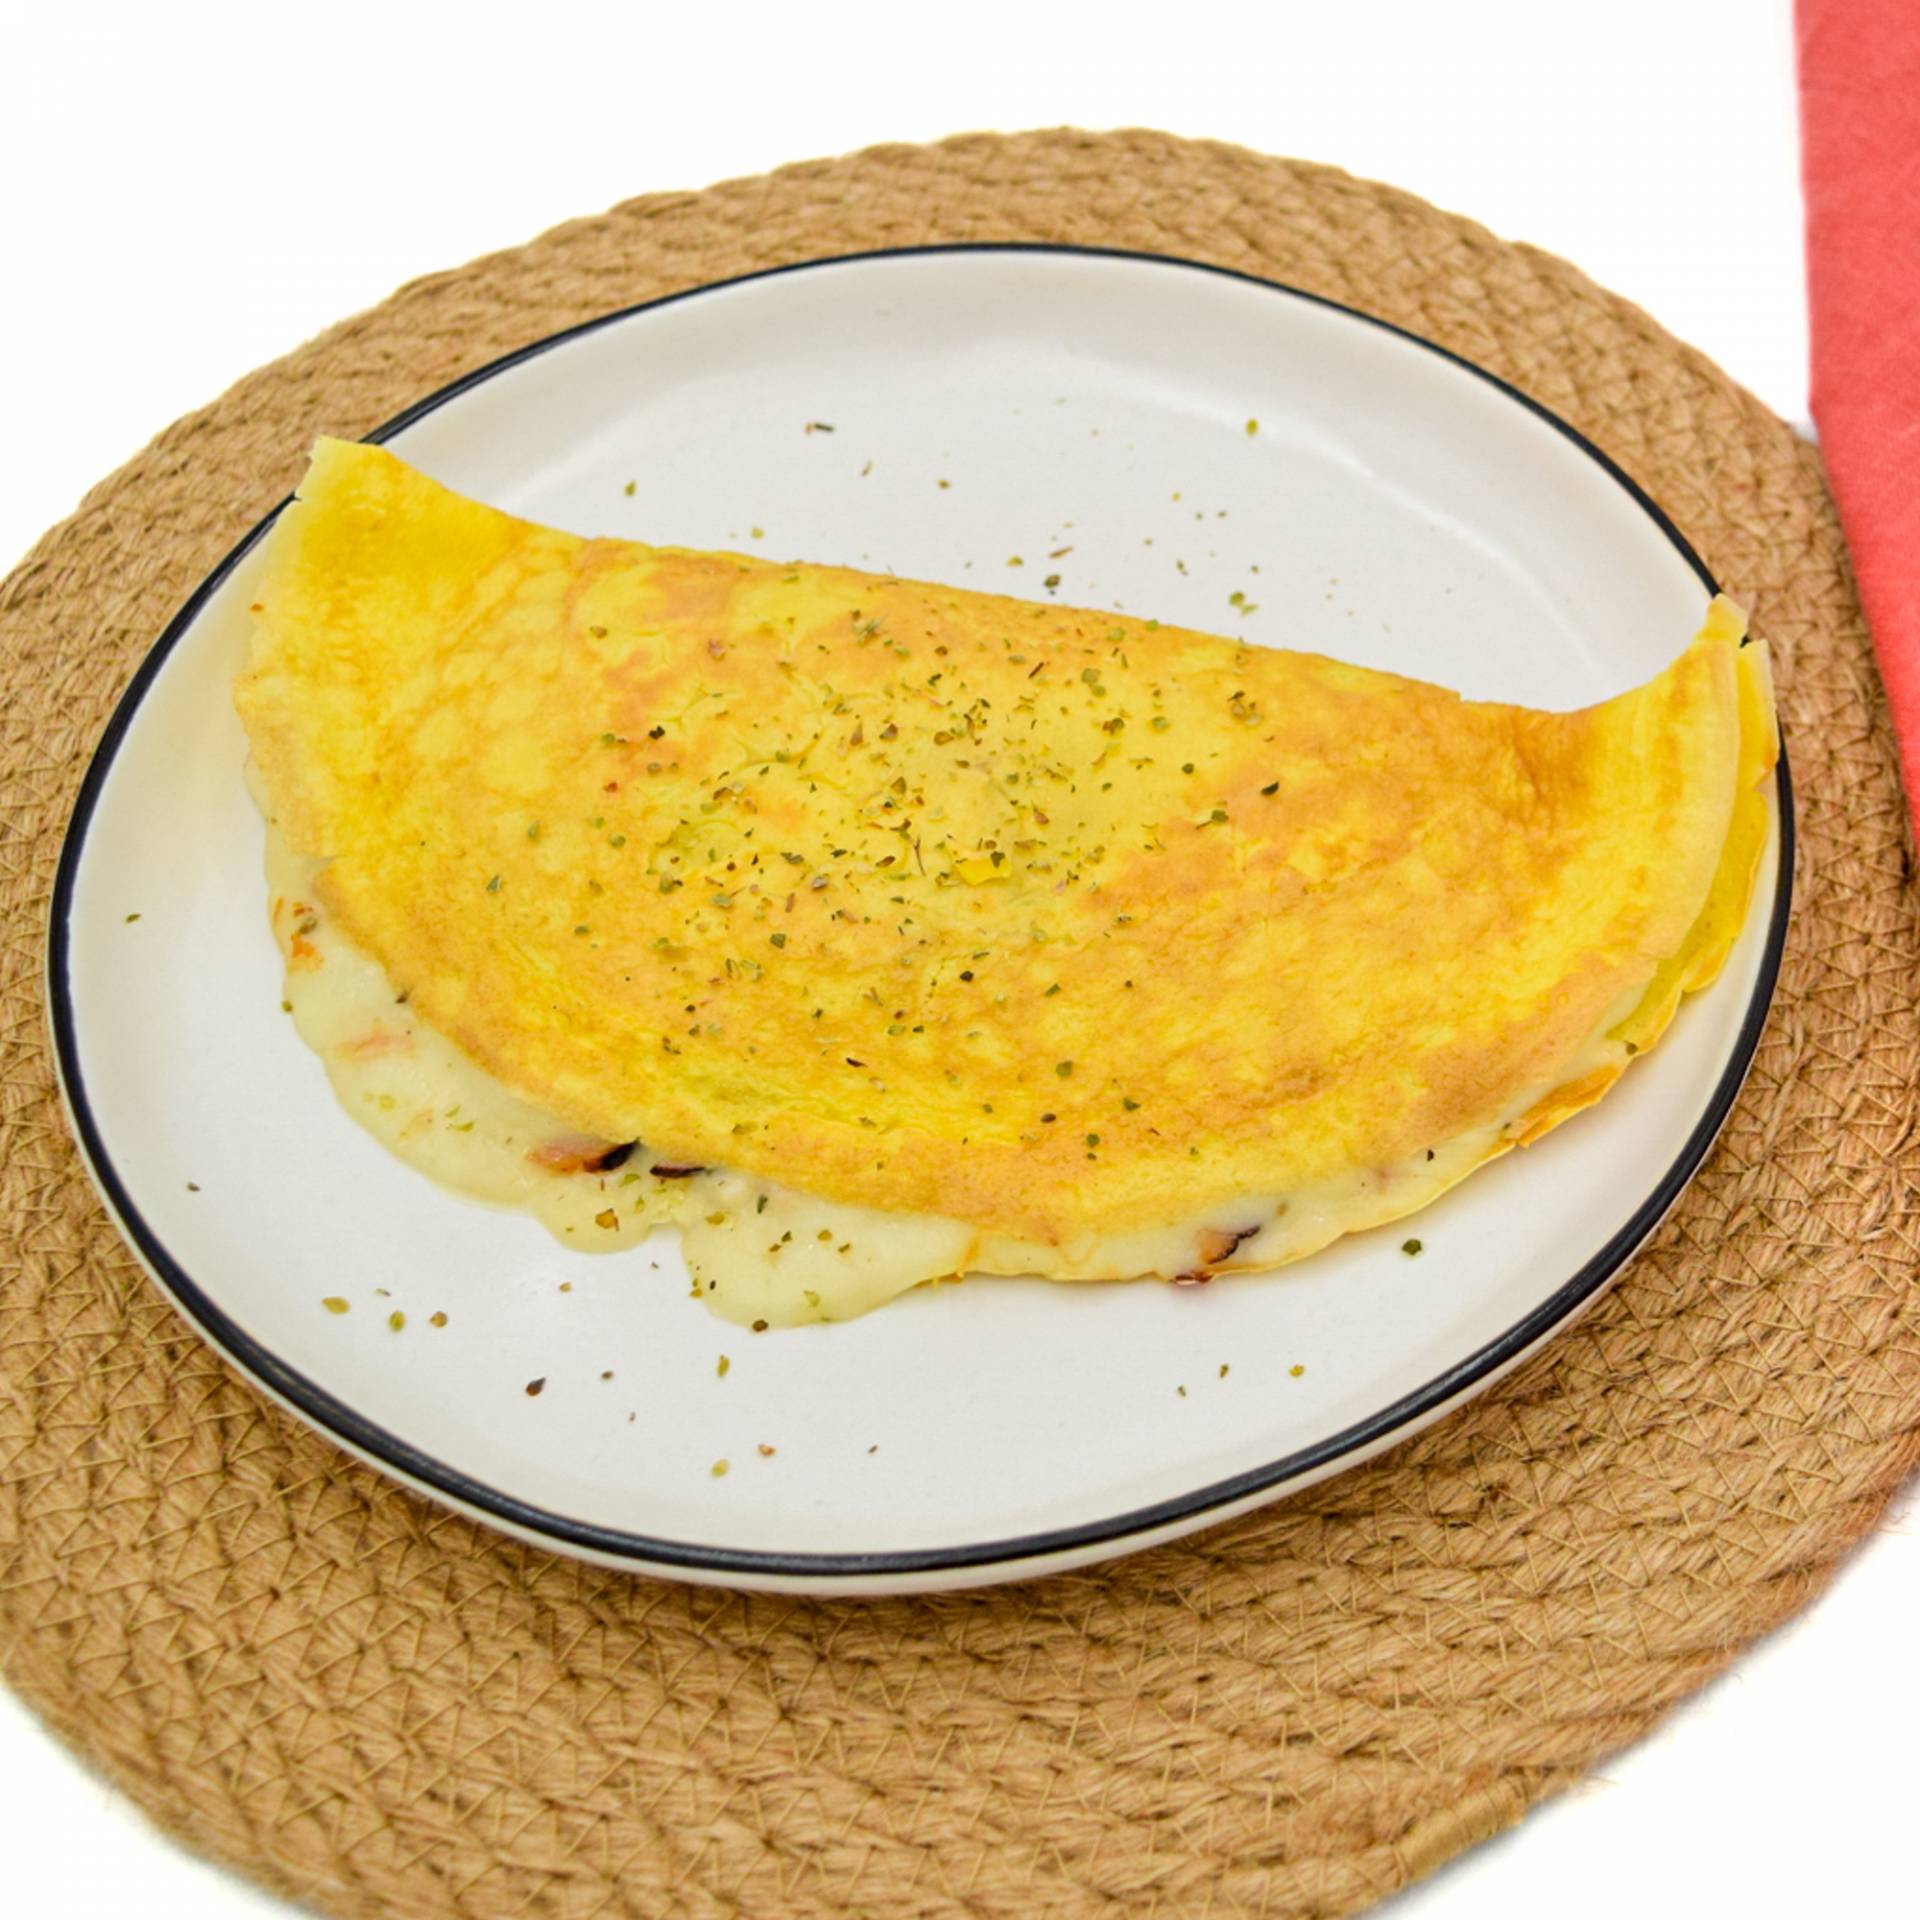 Chicken and cheese omelet